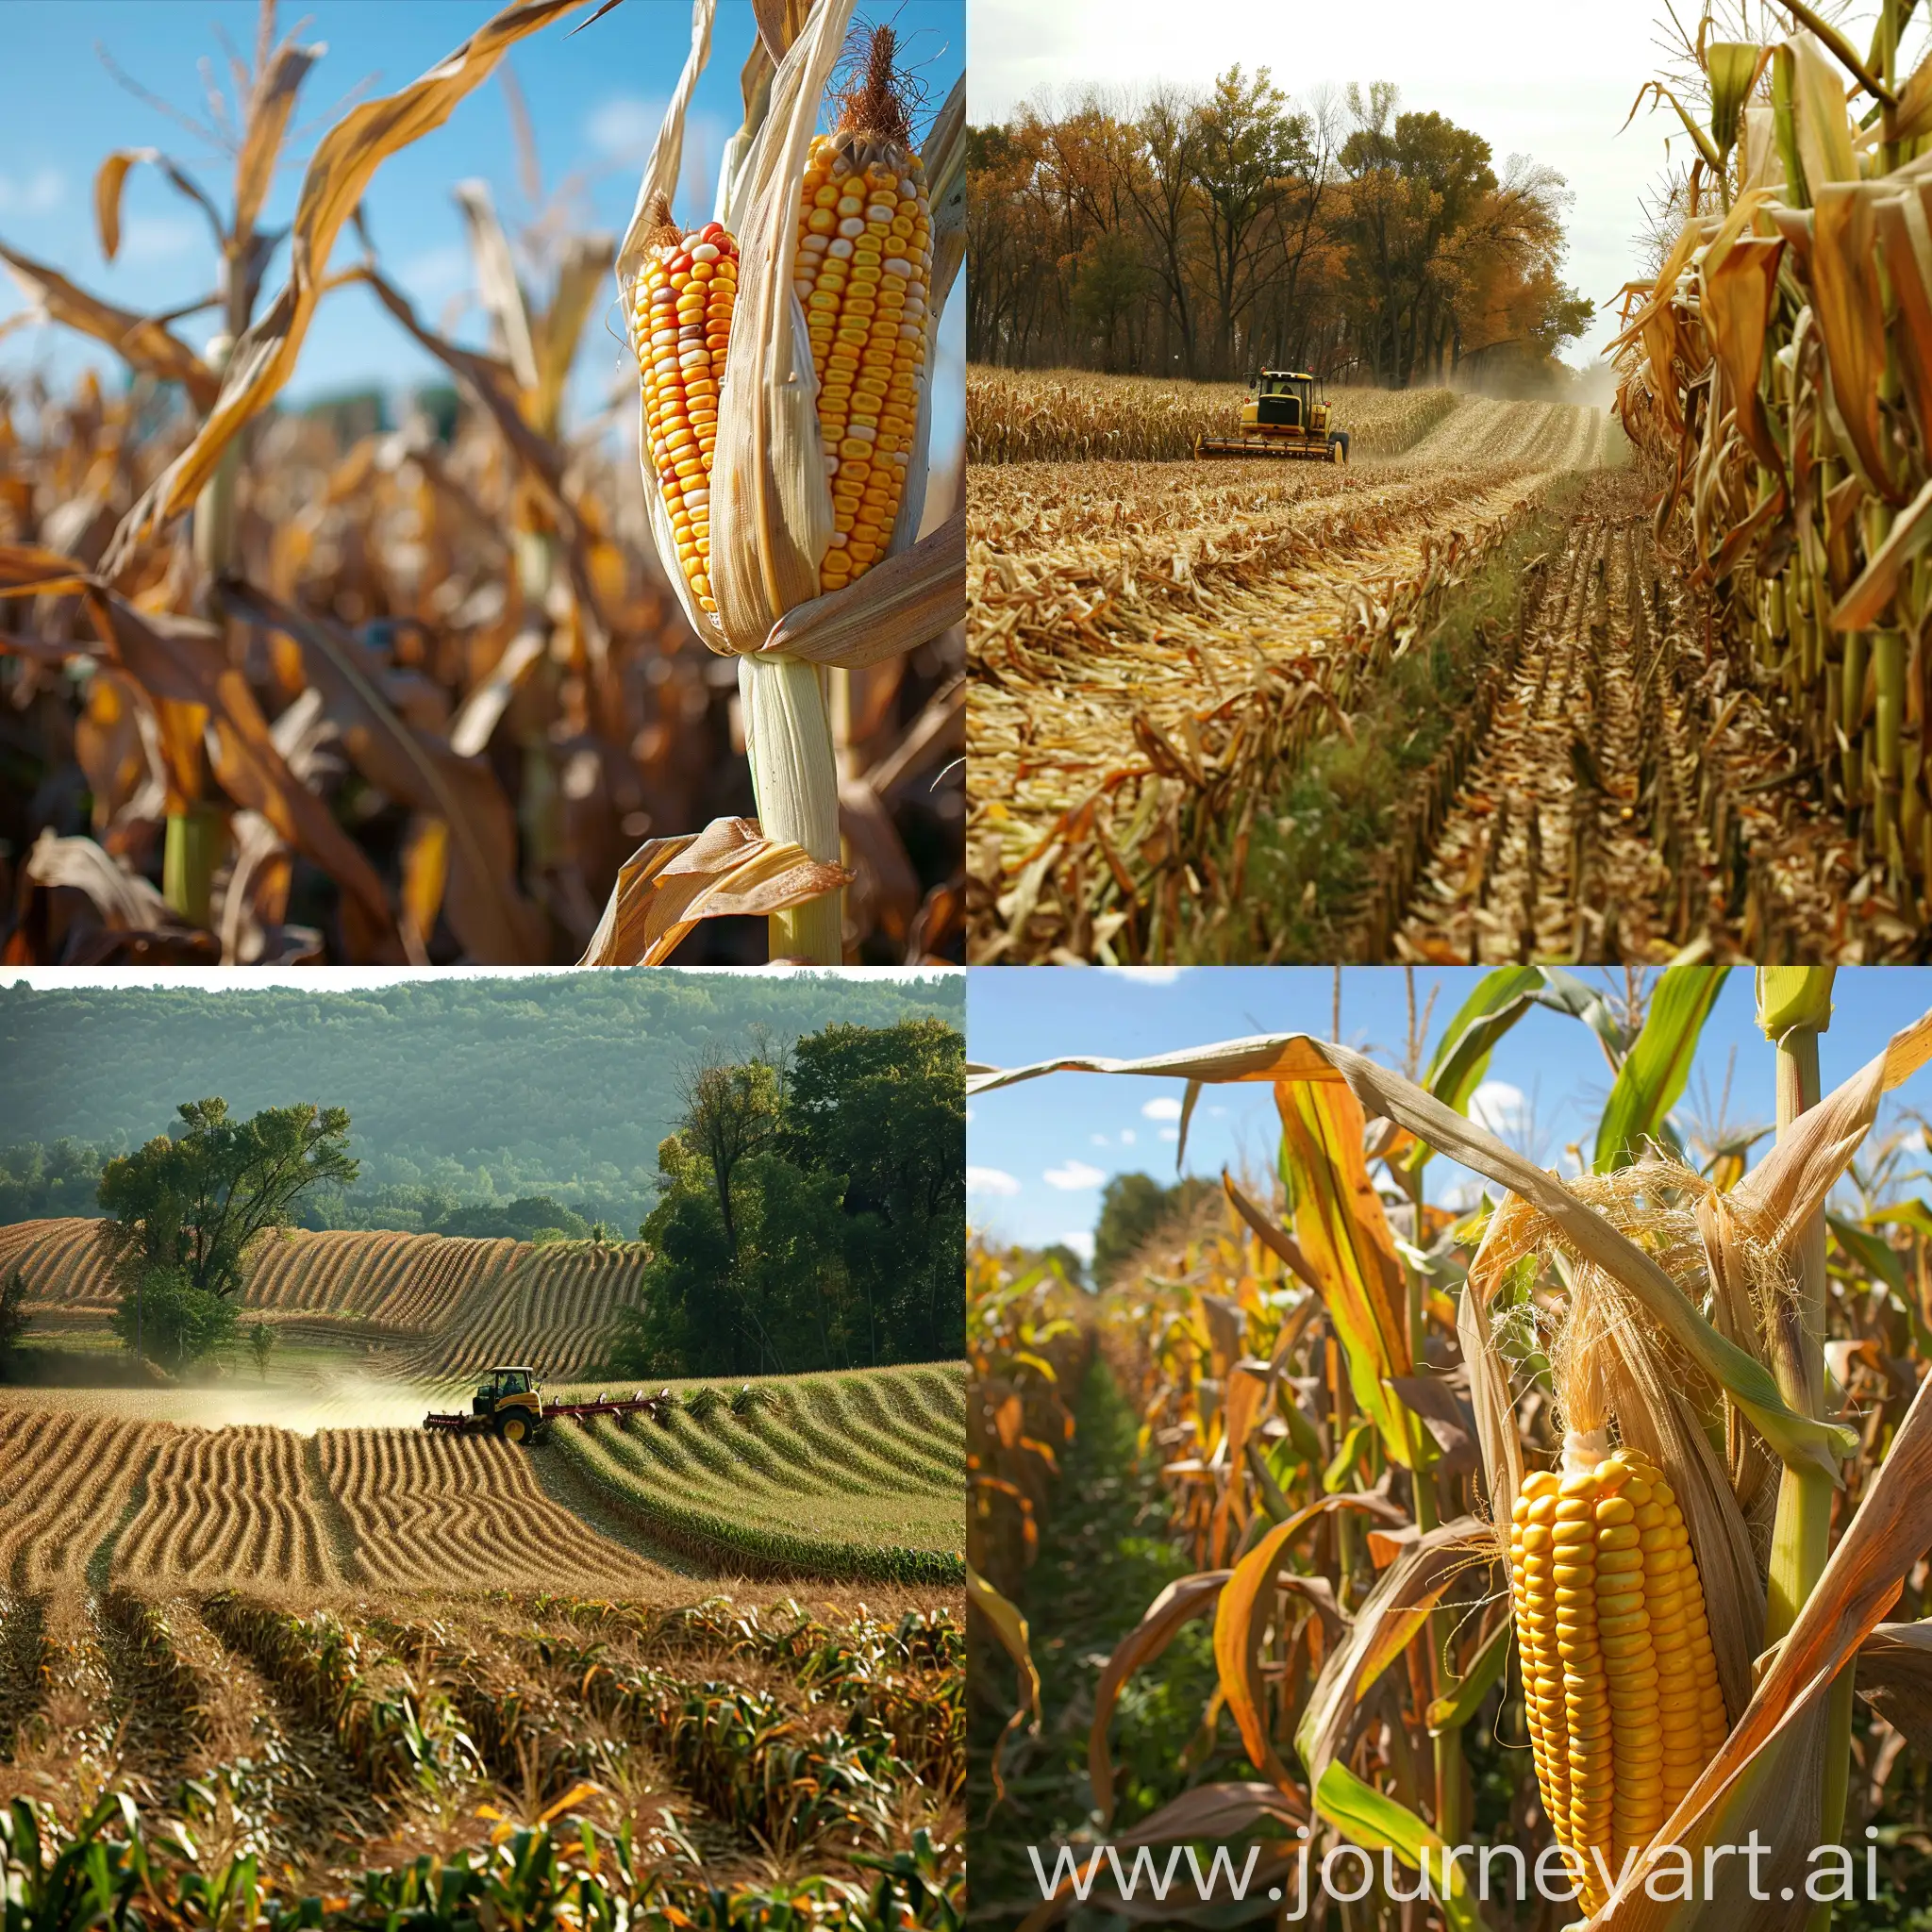 corn field with harvesting process